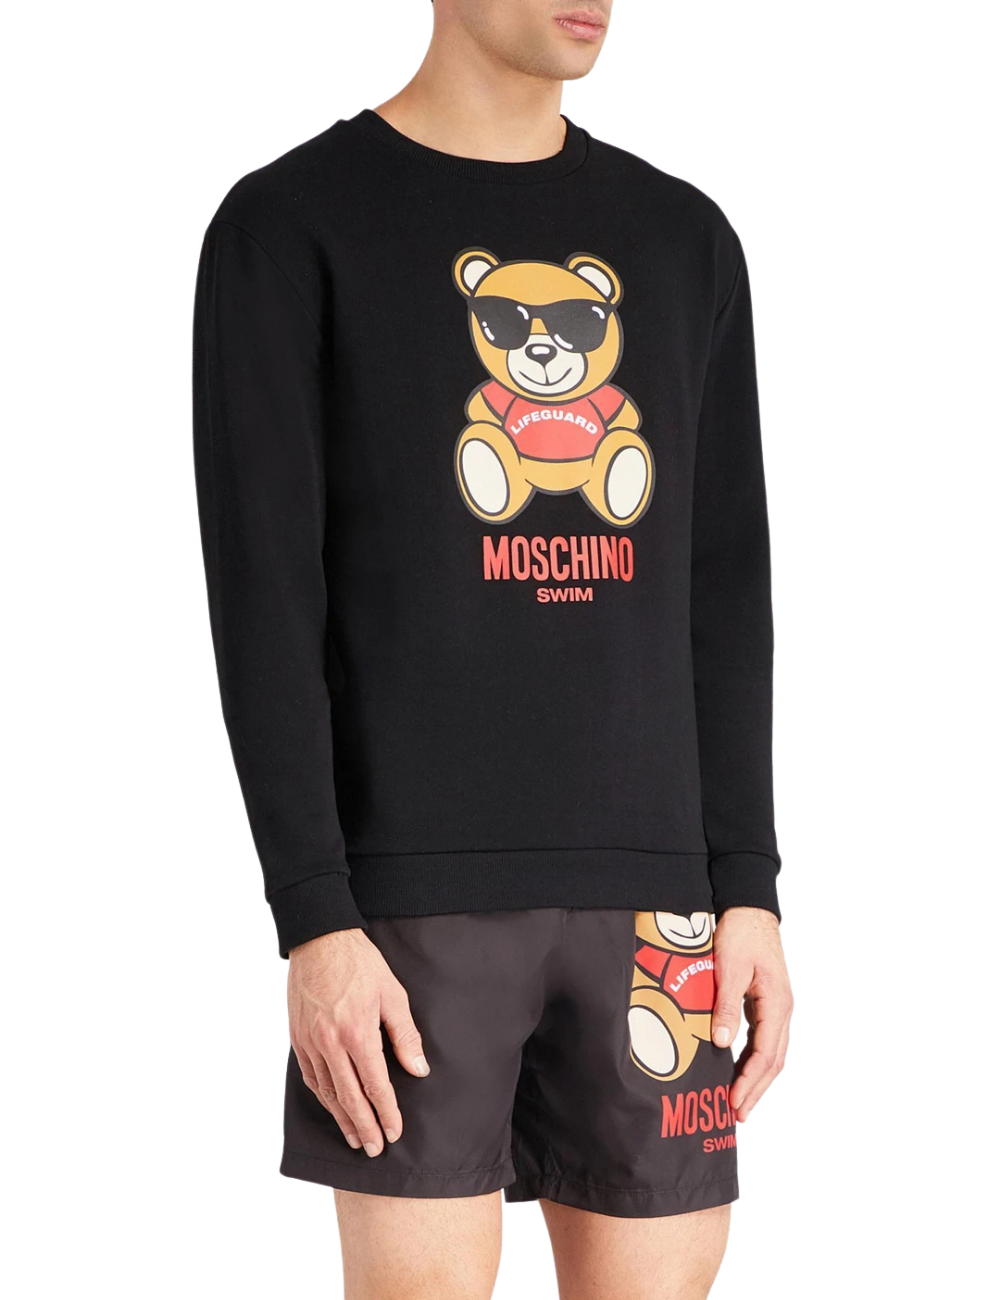 Moschino Lifeguard Bear Sweatshirt - Shop Streetwear, Sneakers, Slippers and Gifts online | Malaysia - The Factory KL